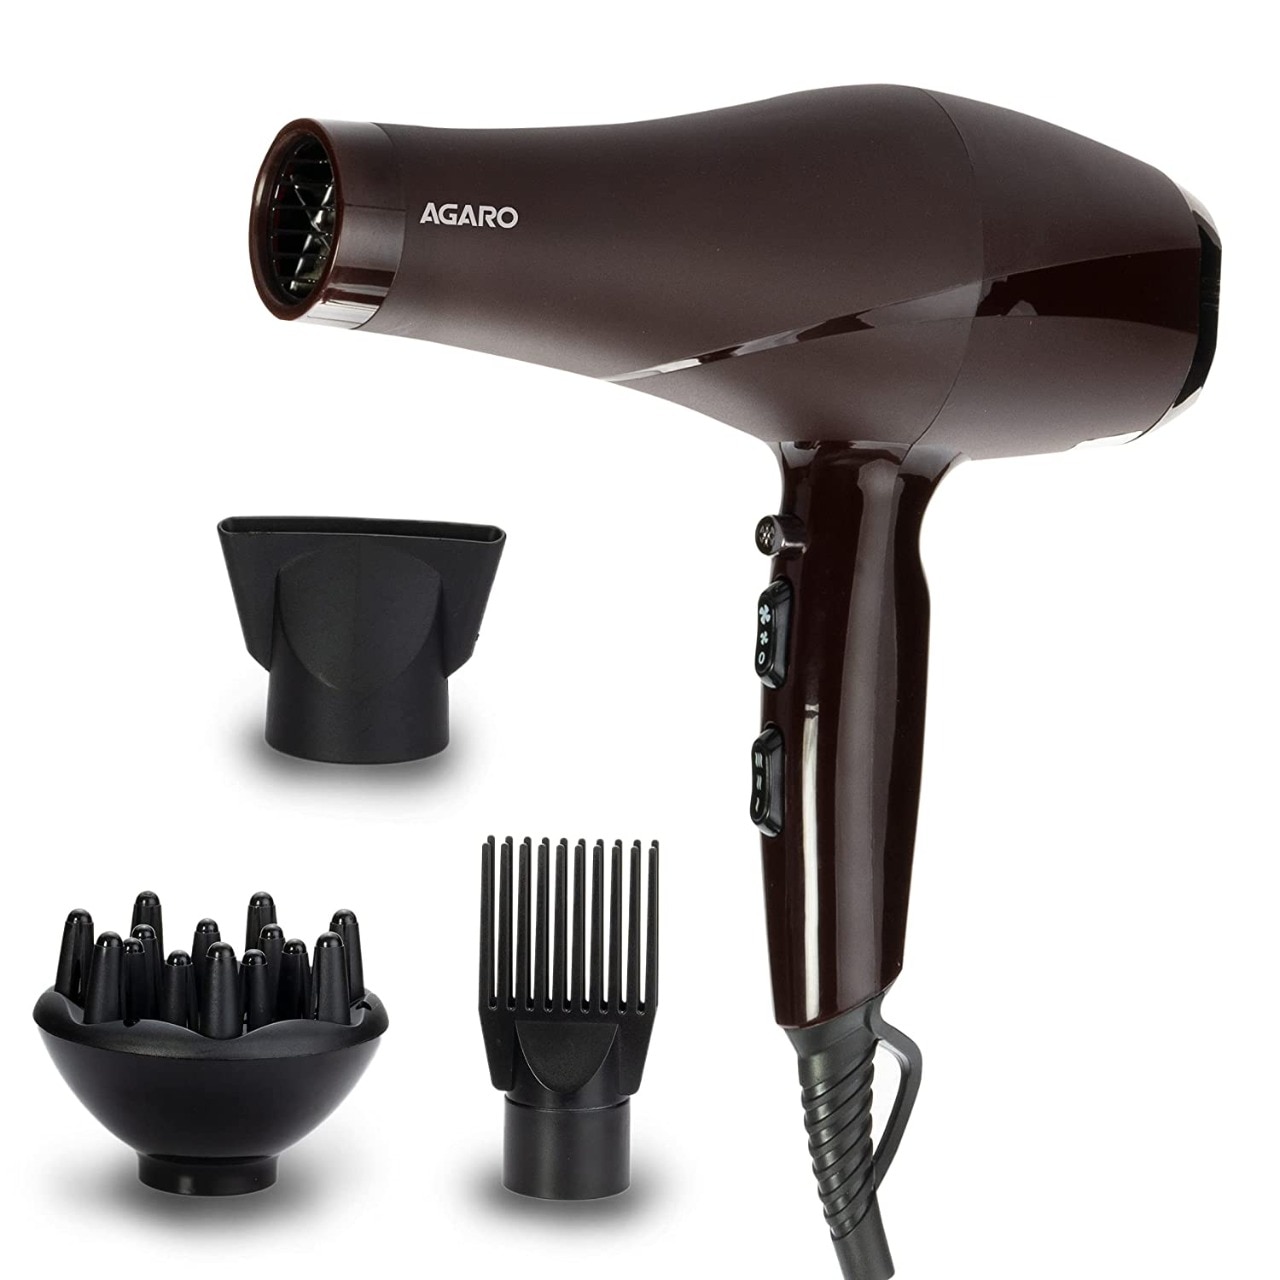 Amazon Great Indian Festival Sale: This will not give cheap hair dryer deals, buy from Amazon for less than Rs.800